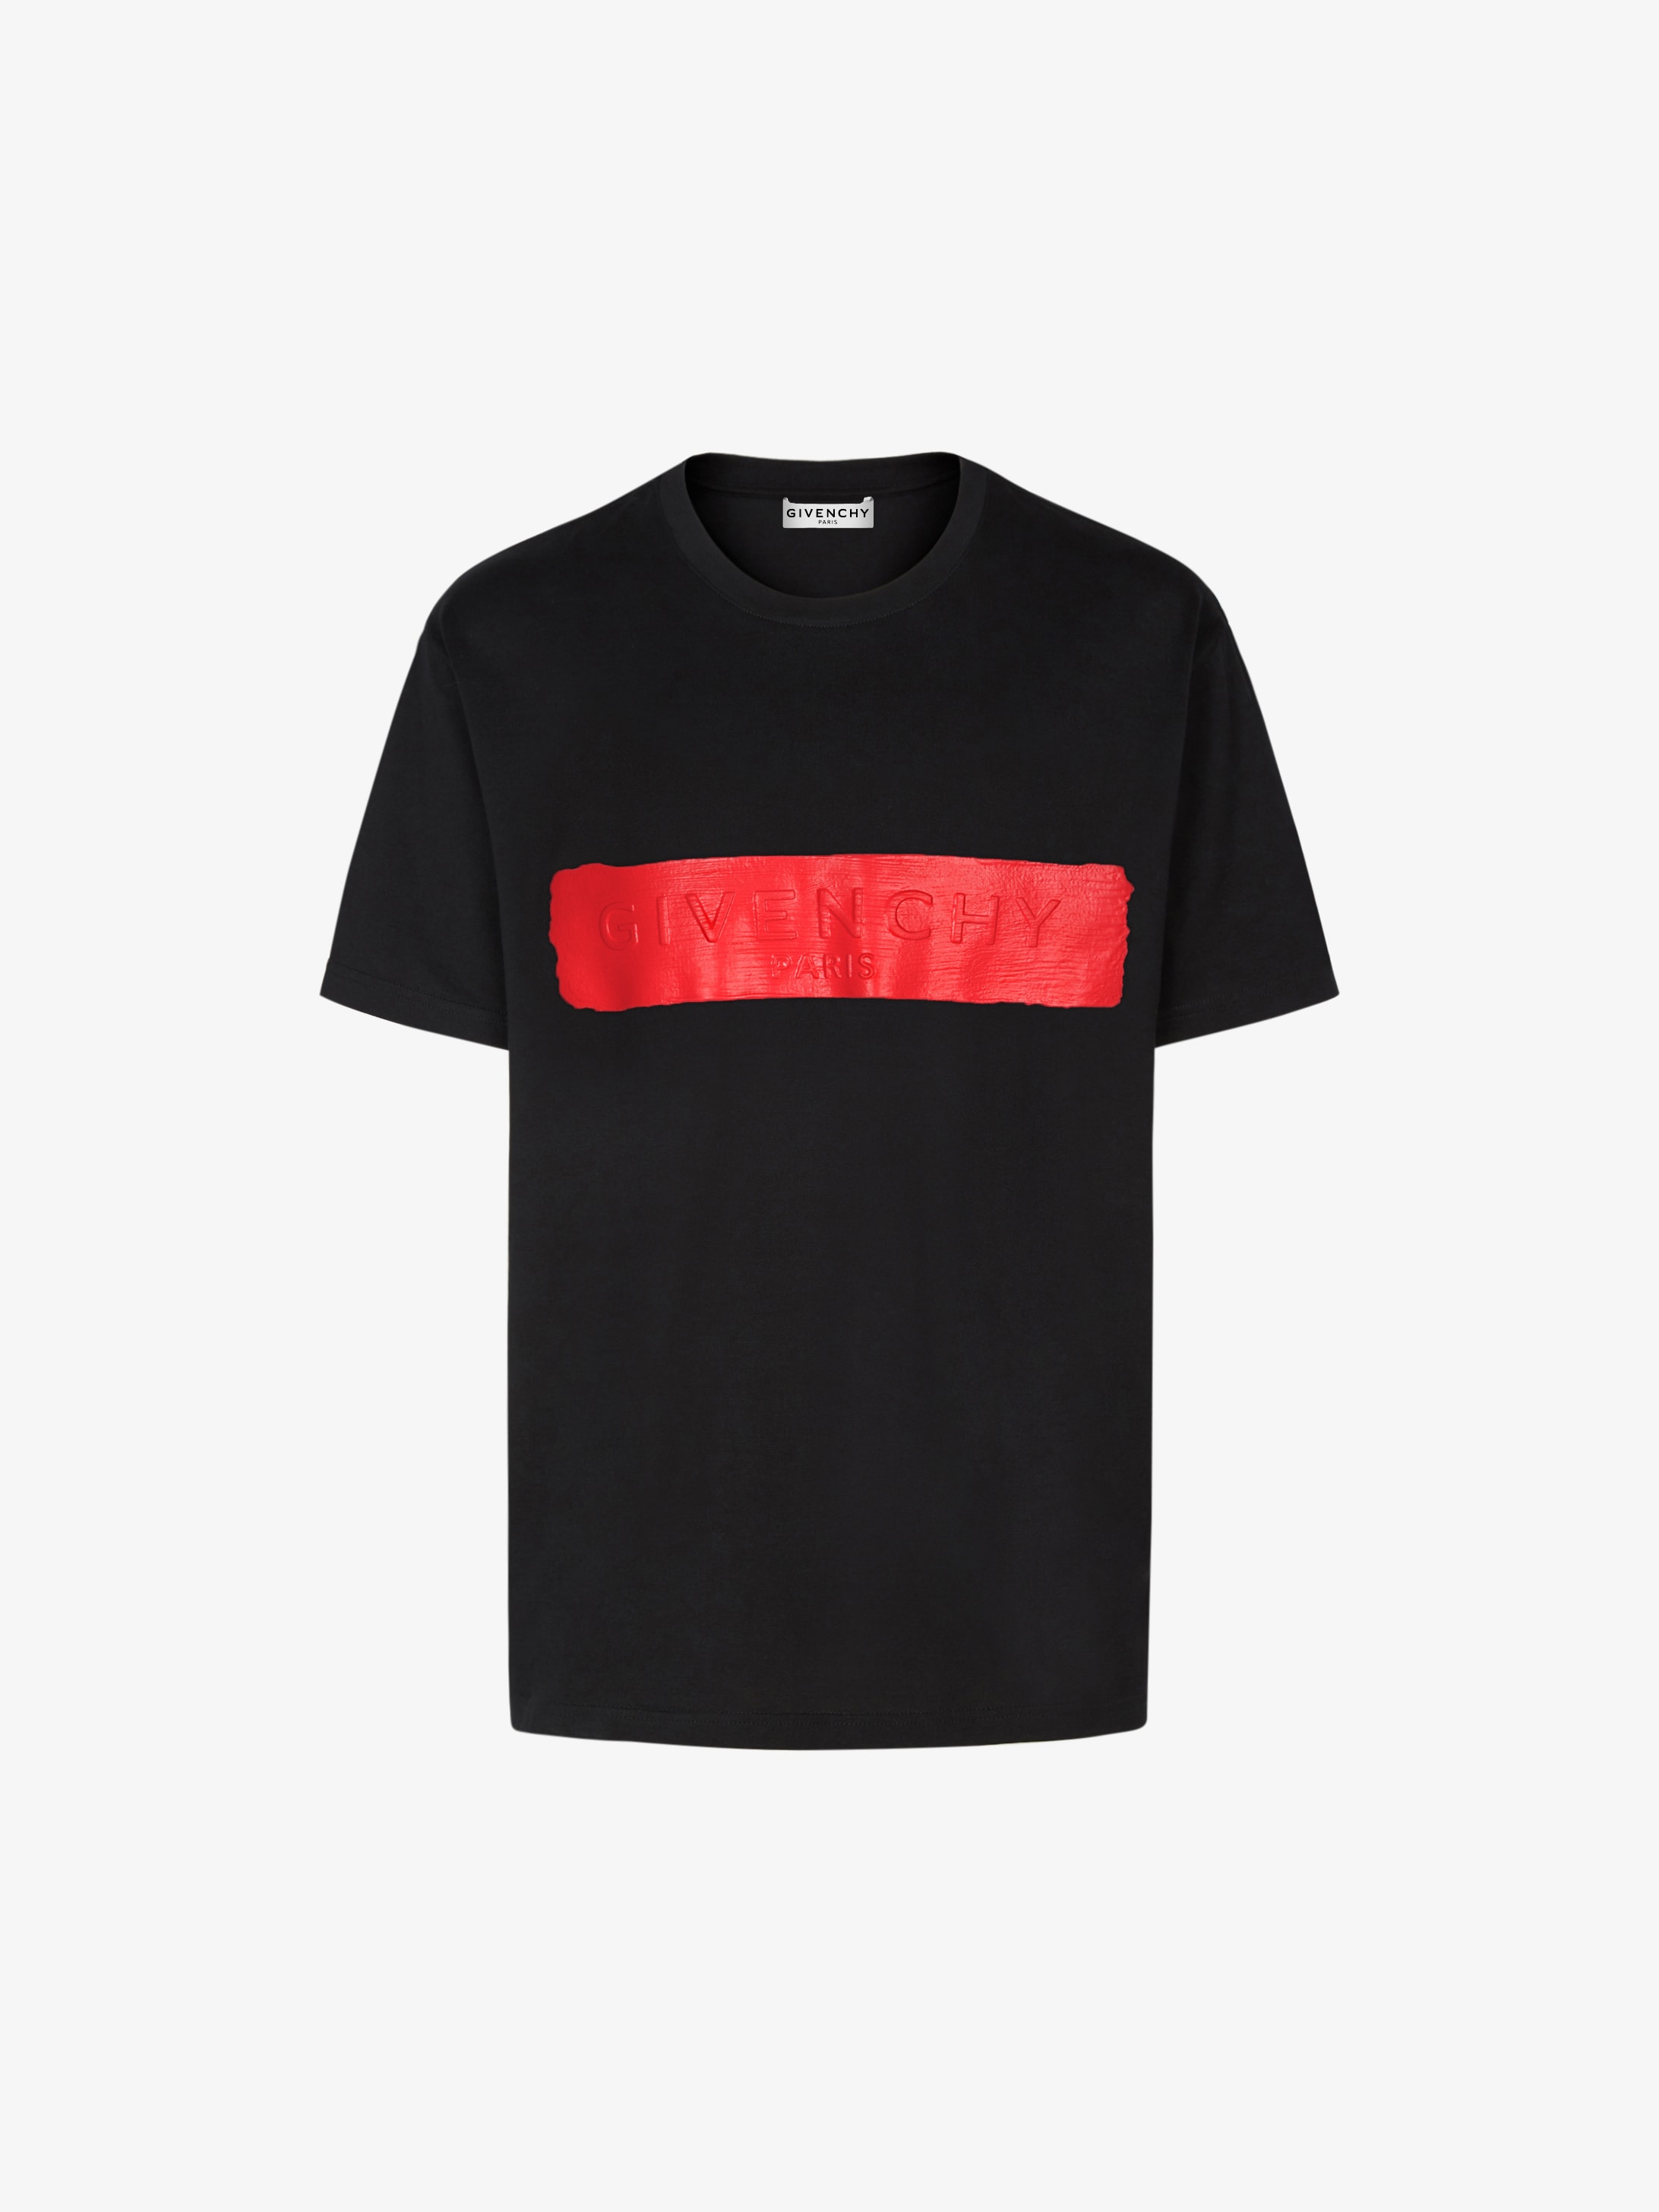 givenchy shirt red